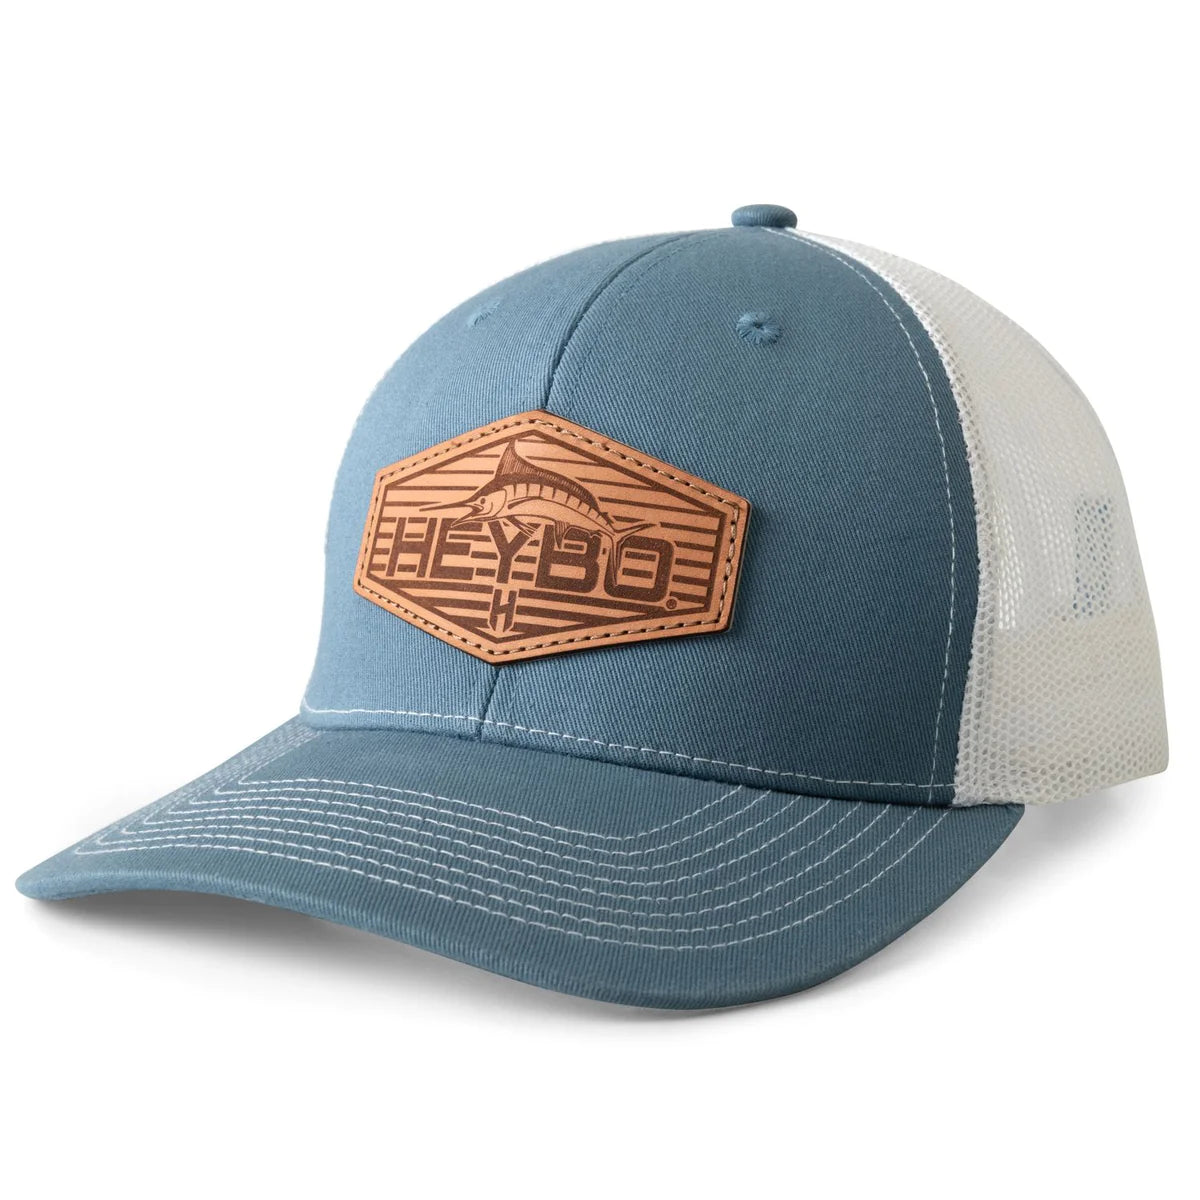 Heybo Leather Marlin Patch Meshback Hat